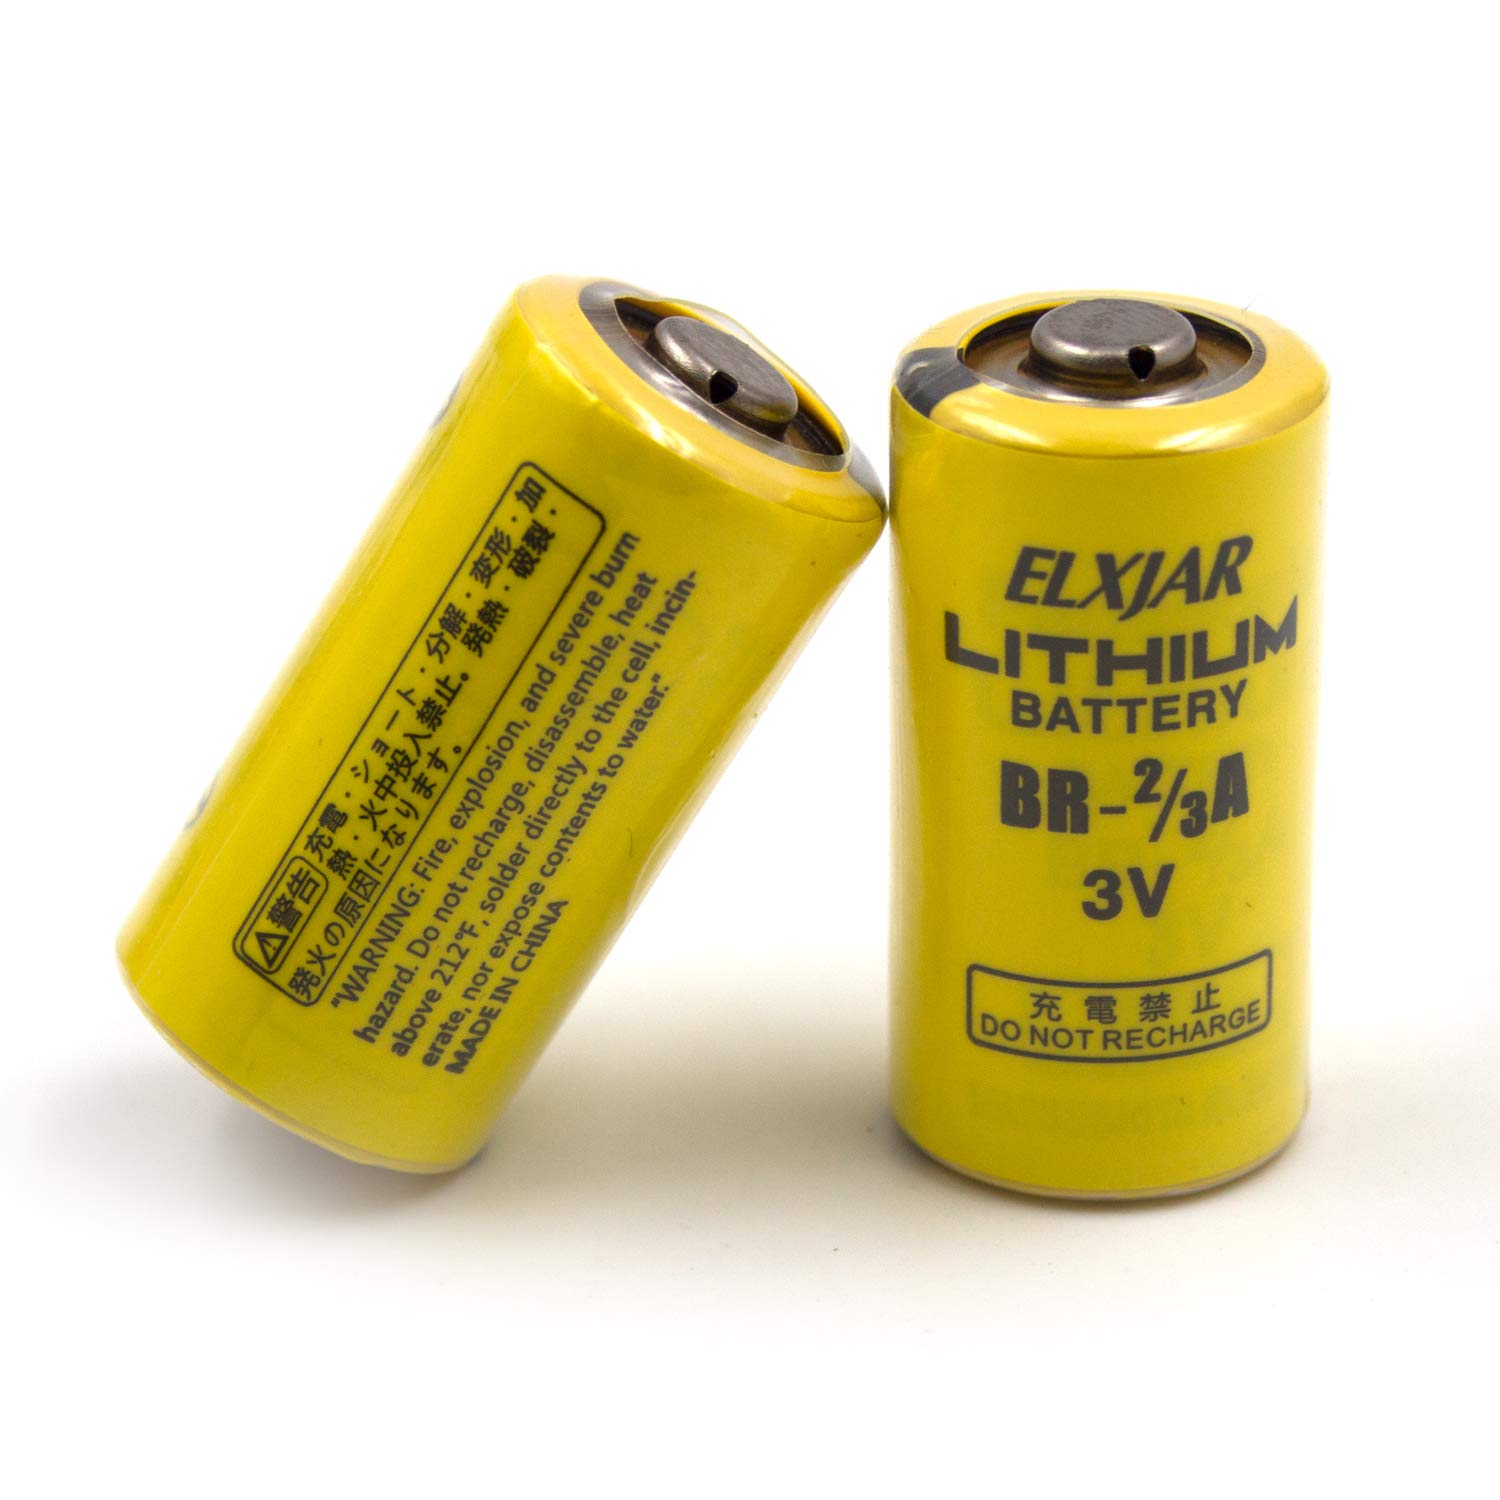 elxjar (2-Pack) 3V BR-2/3ASSP 2/3A Lithium Battery, Replacement for Panasonic BR-2/3A